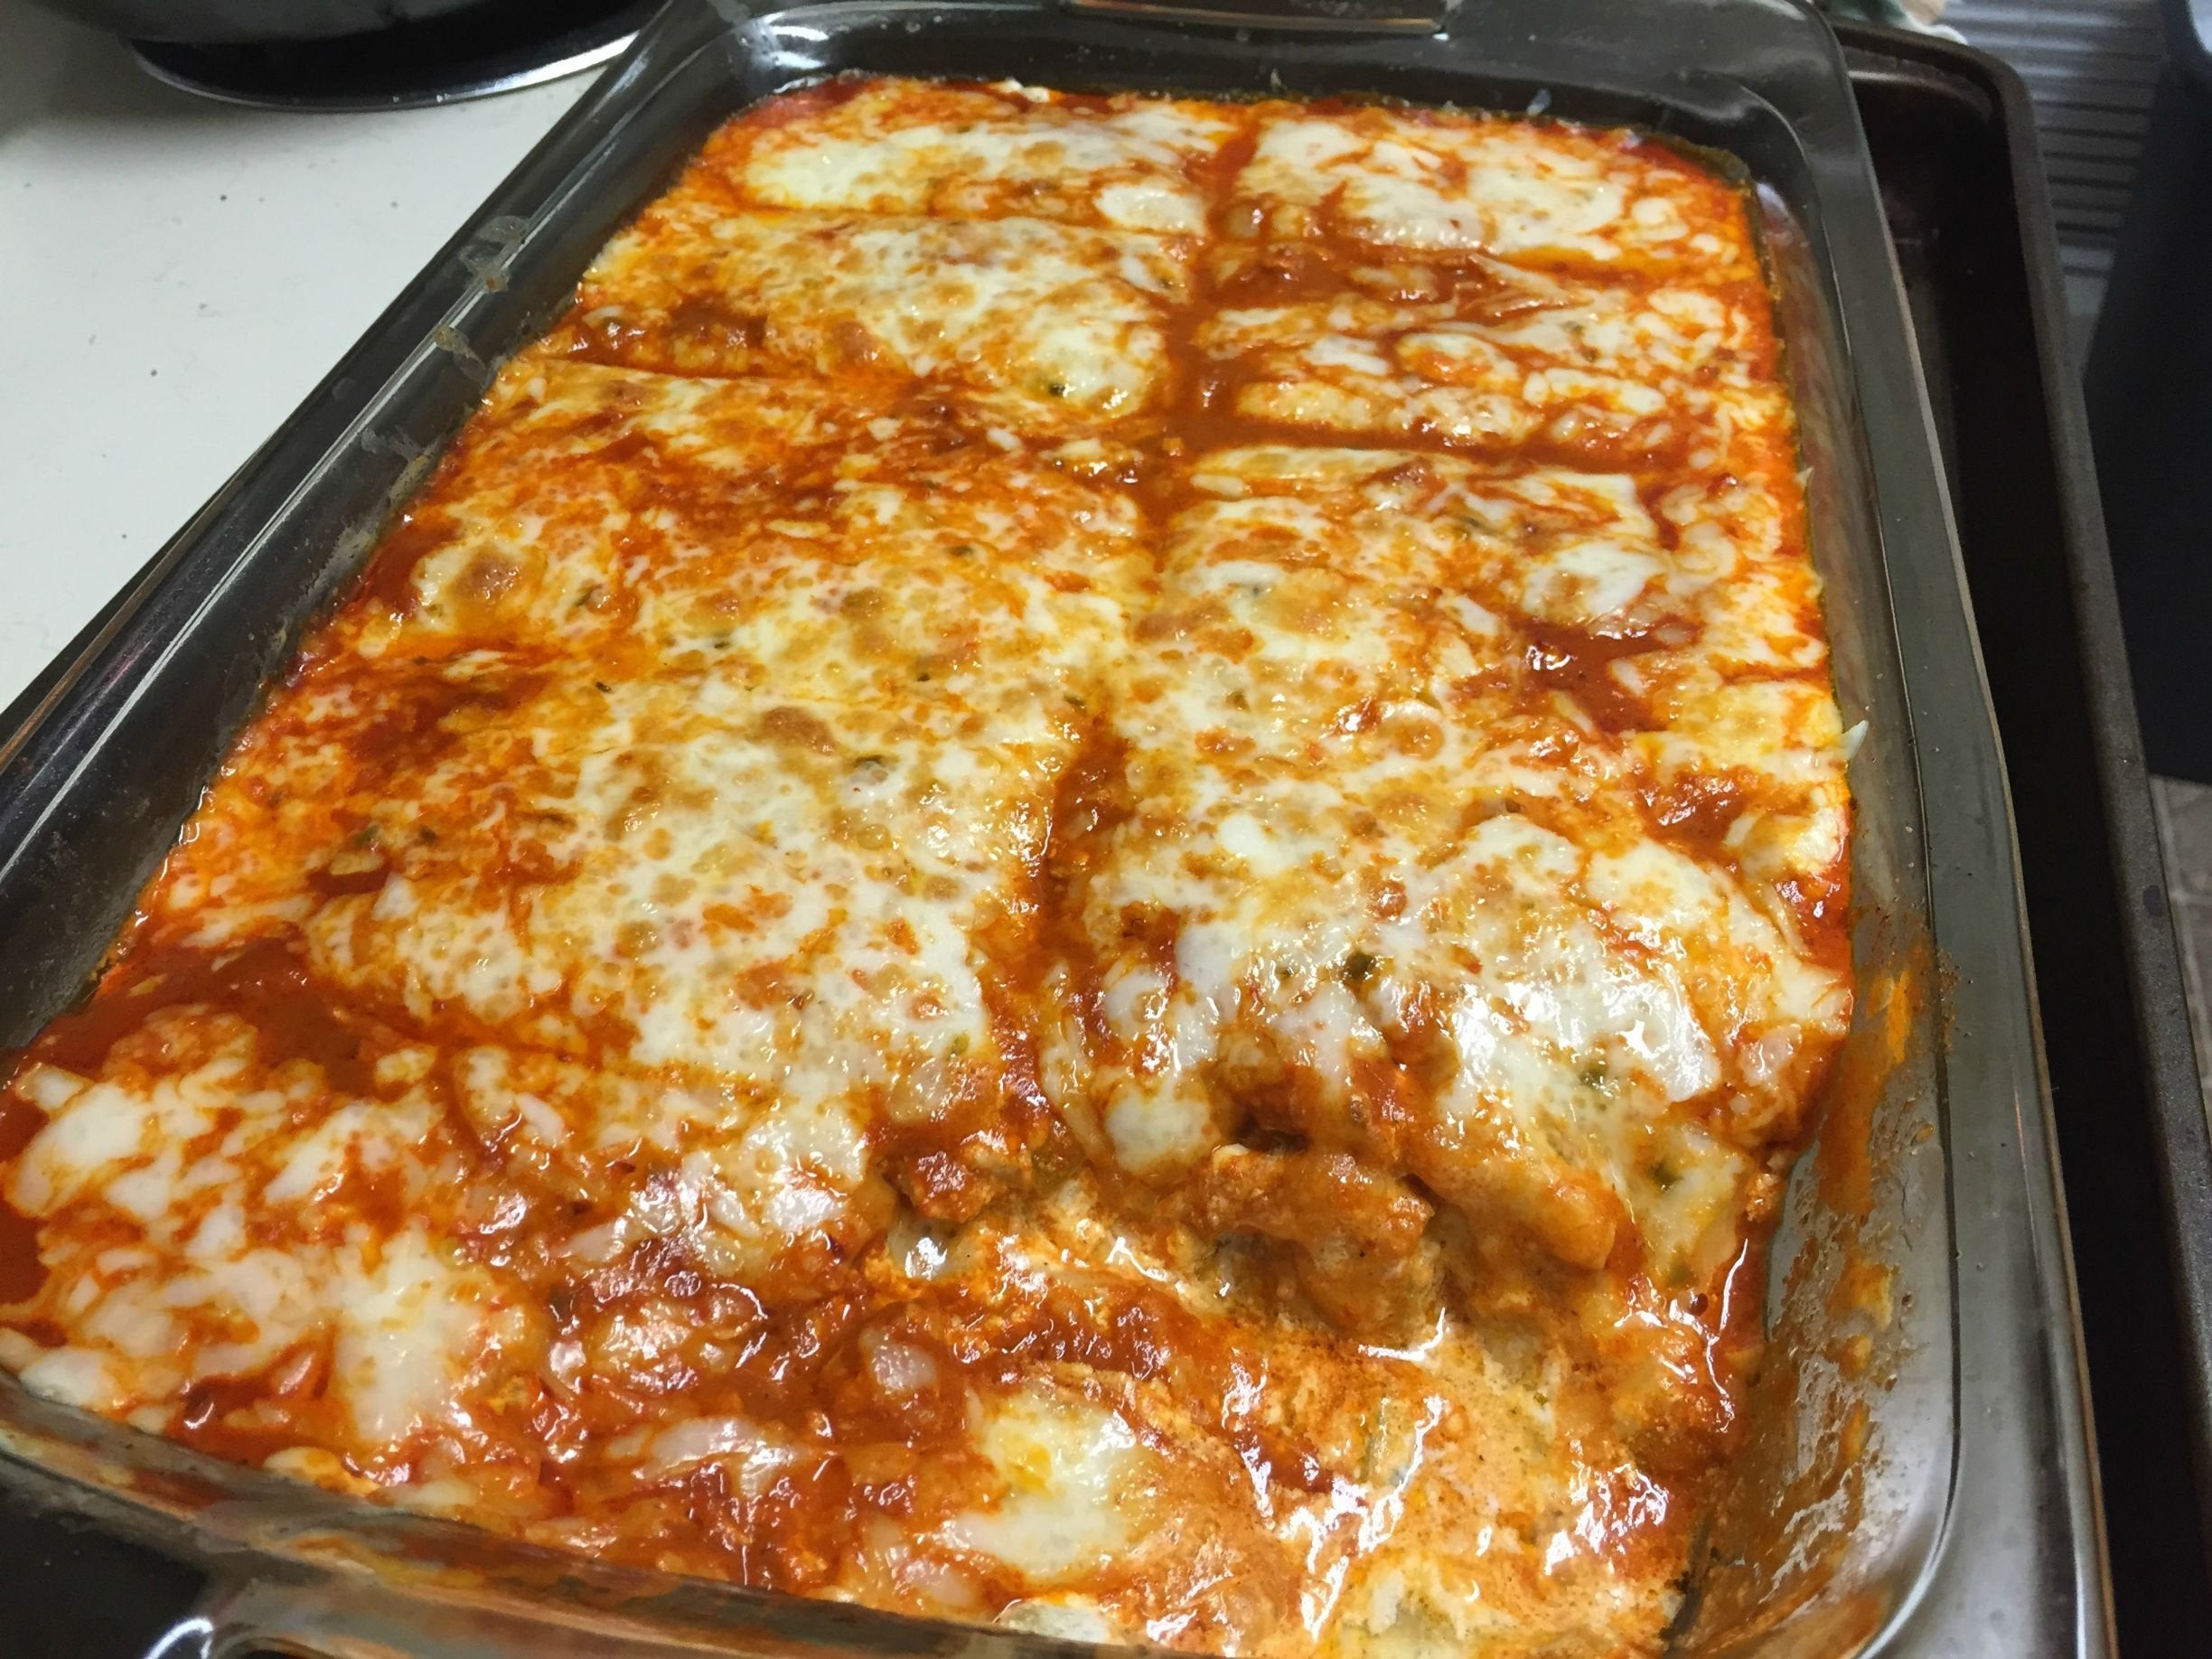 Chicken Keto Recipes Easy Dinners
 Keto Chicken Enchilada Bake It s a mess but suuuuper